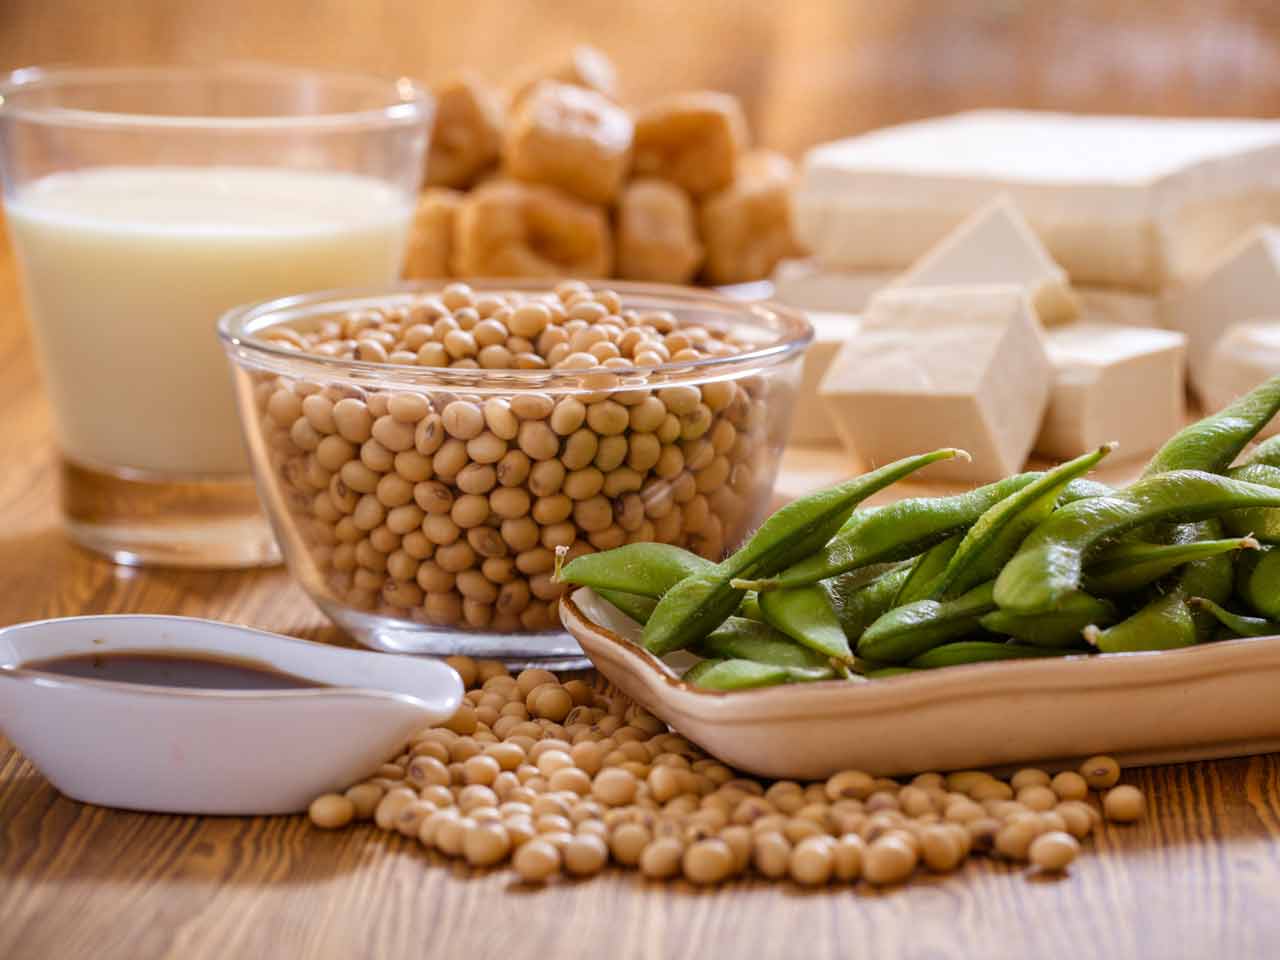 You can naturally increase your oestrogen levels by eating plenty of soya